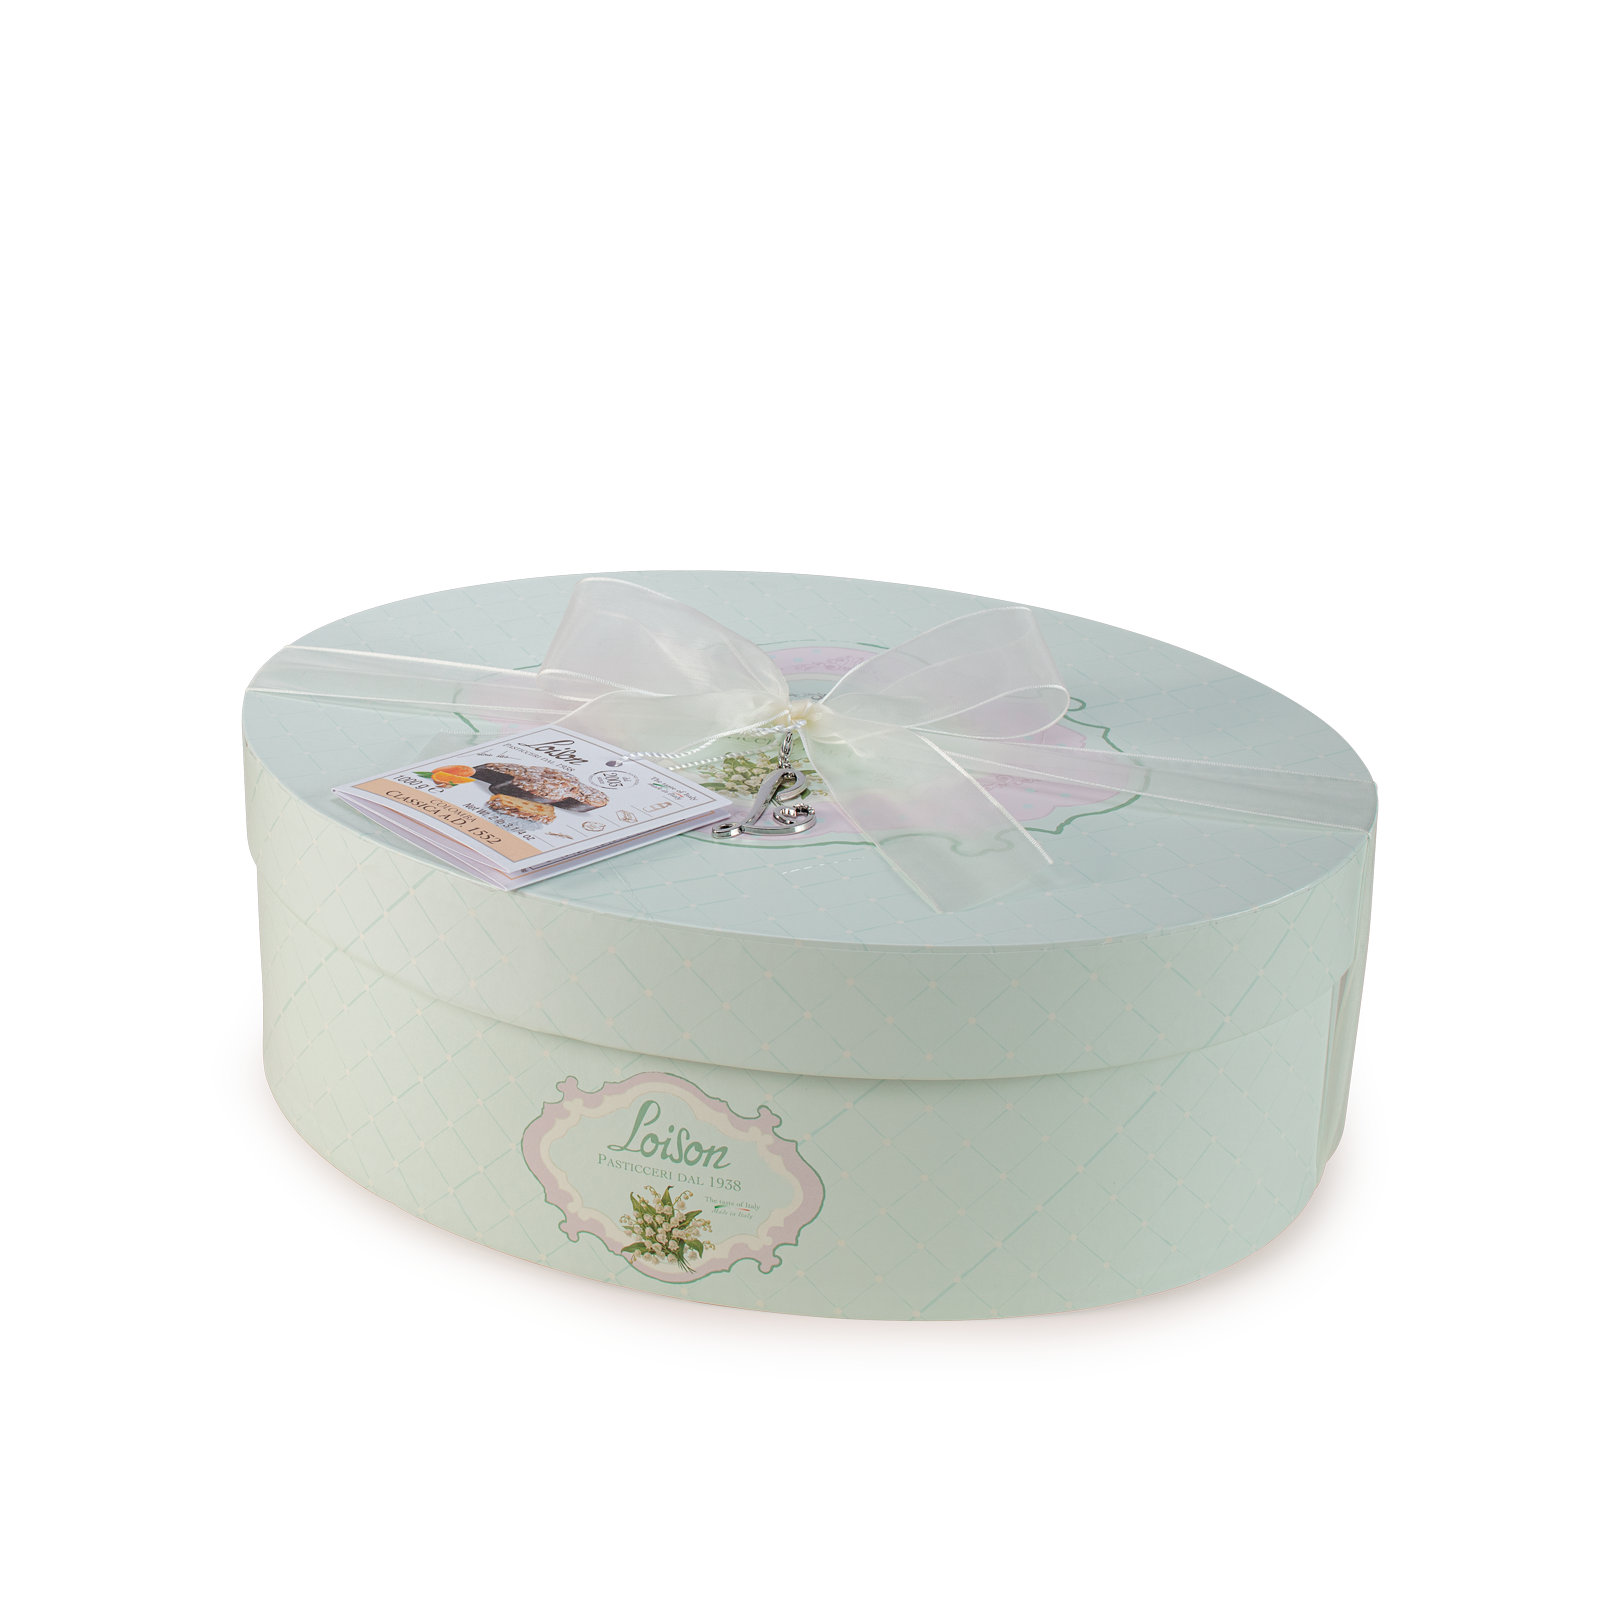 Traditional Easter Colomba cake in hat box